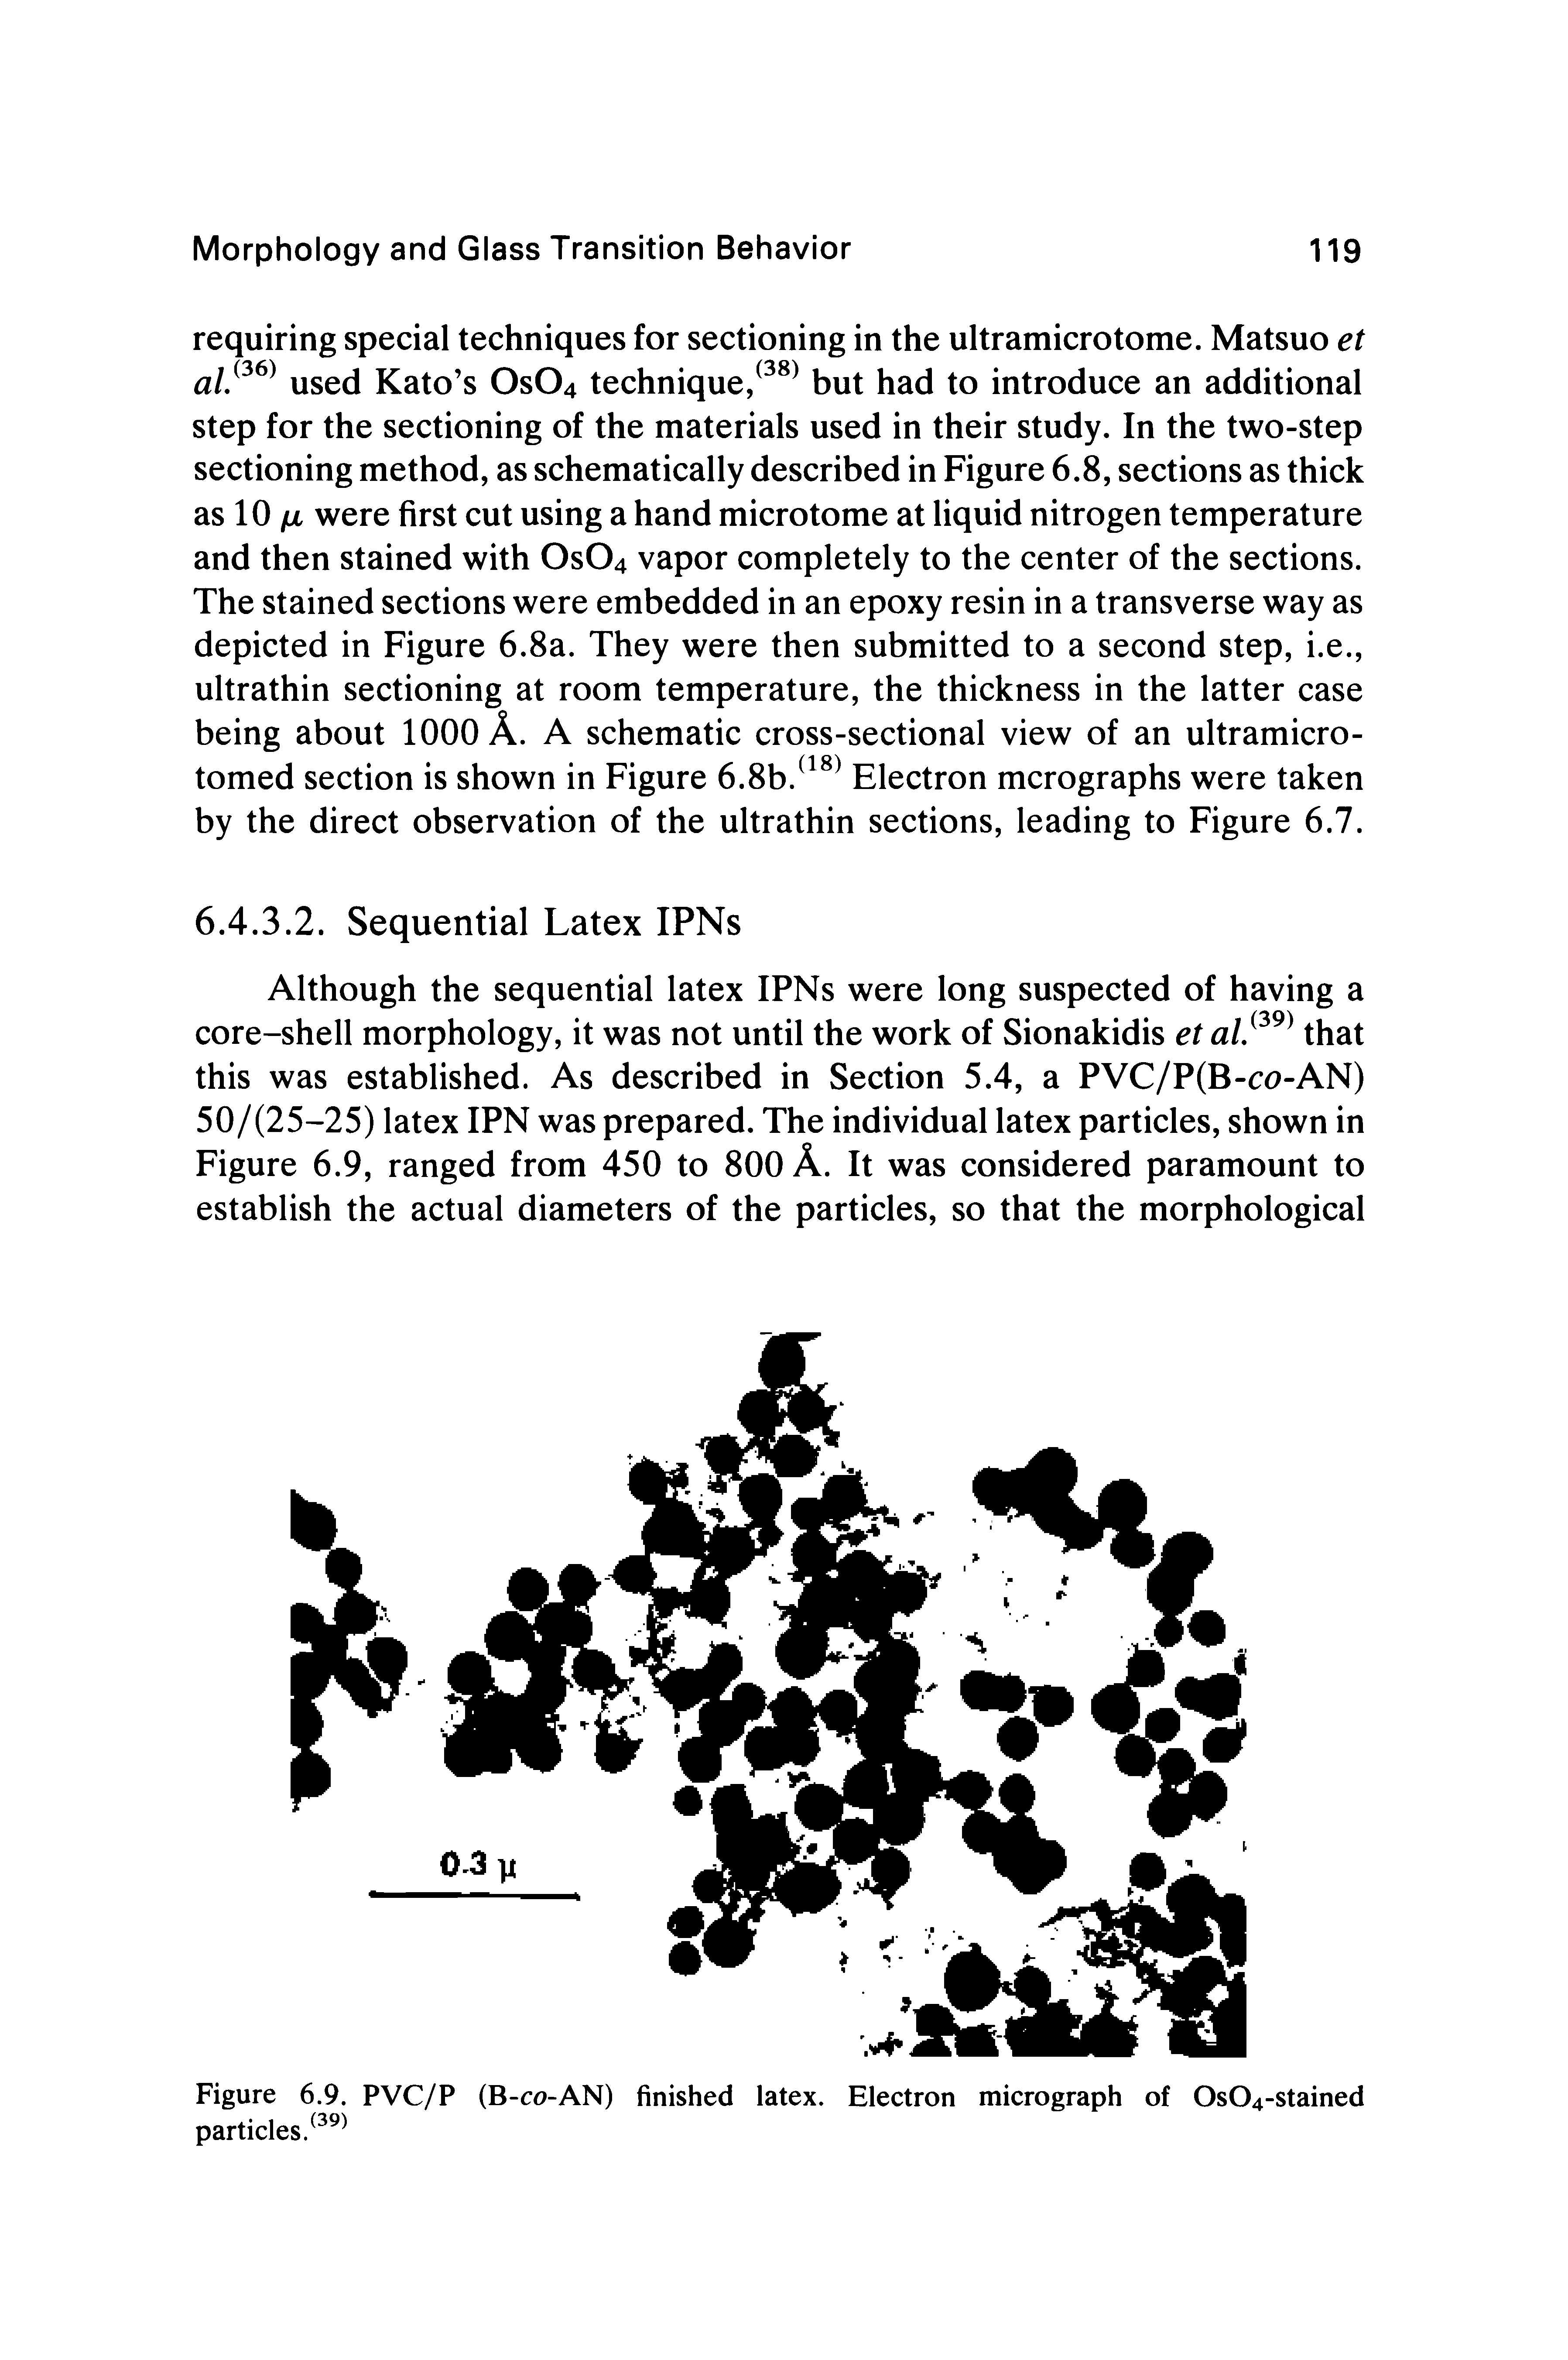 Figure 6.9. PVC/P (B-co-AN) finished latex. Electron micrograph of Os04-stained particles.